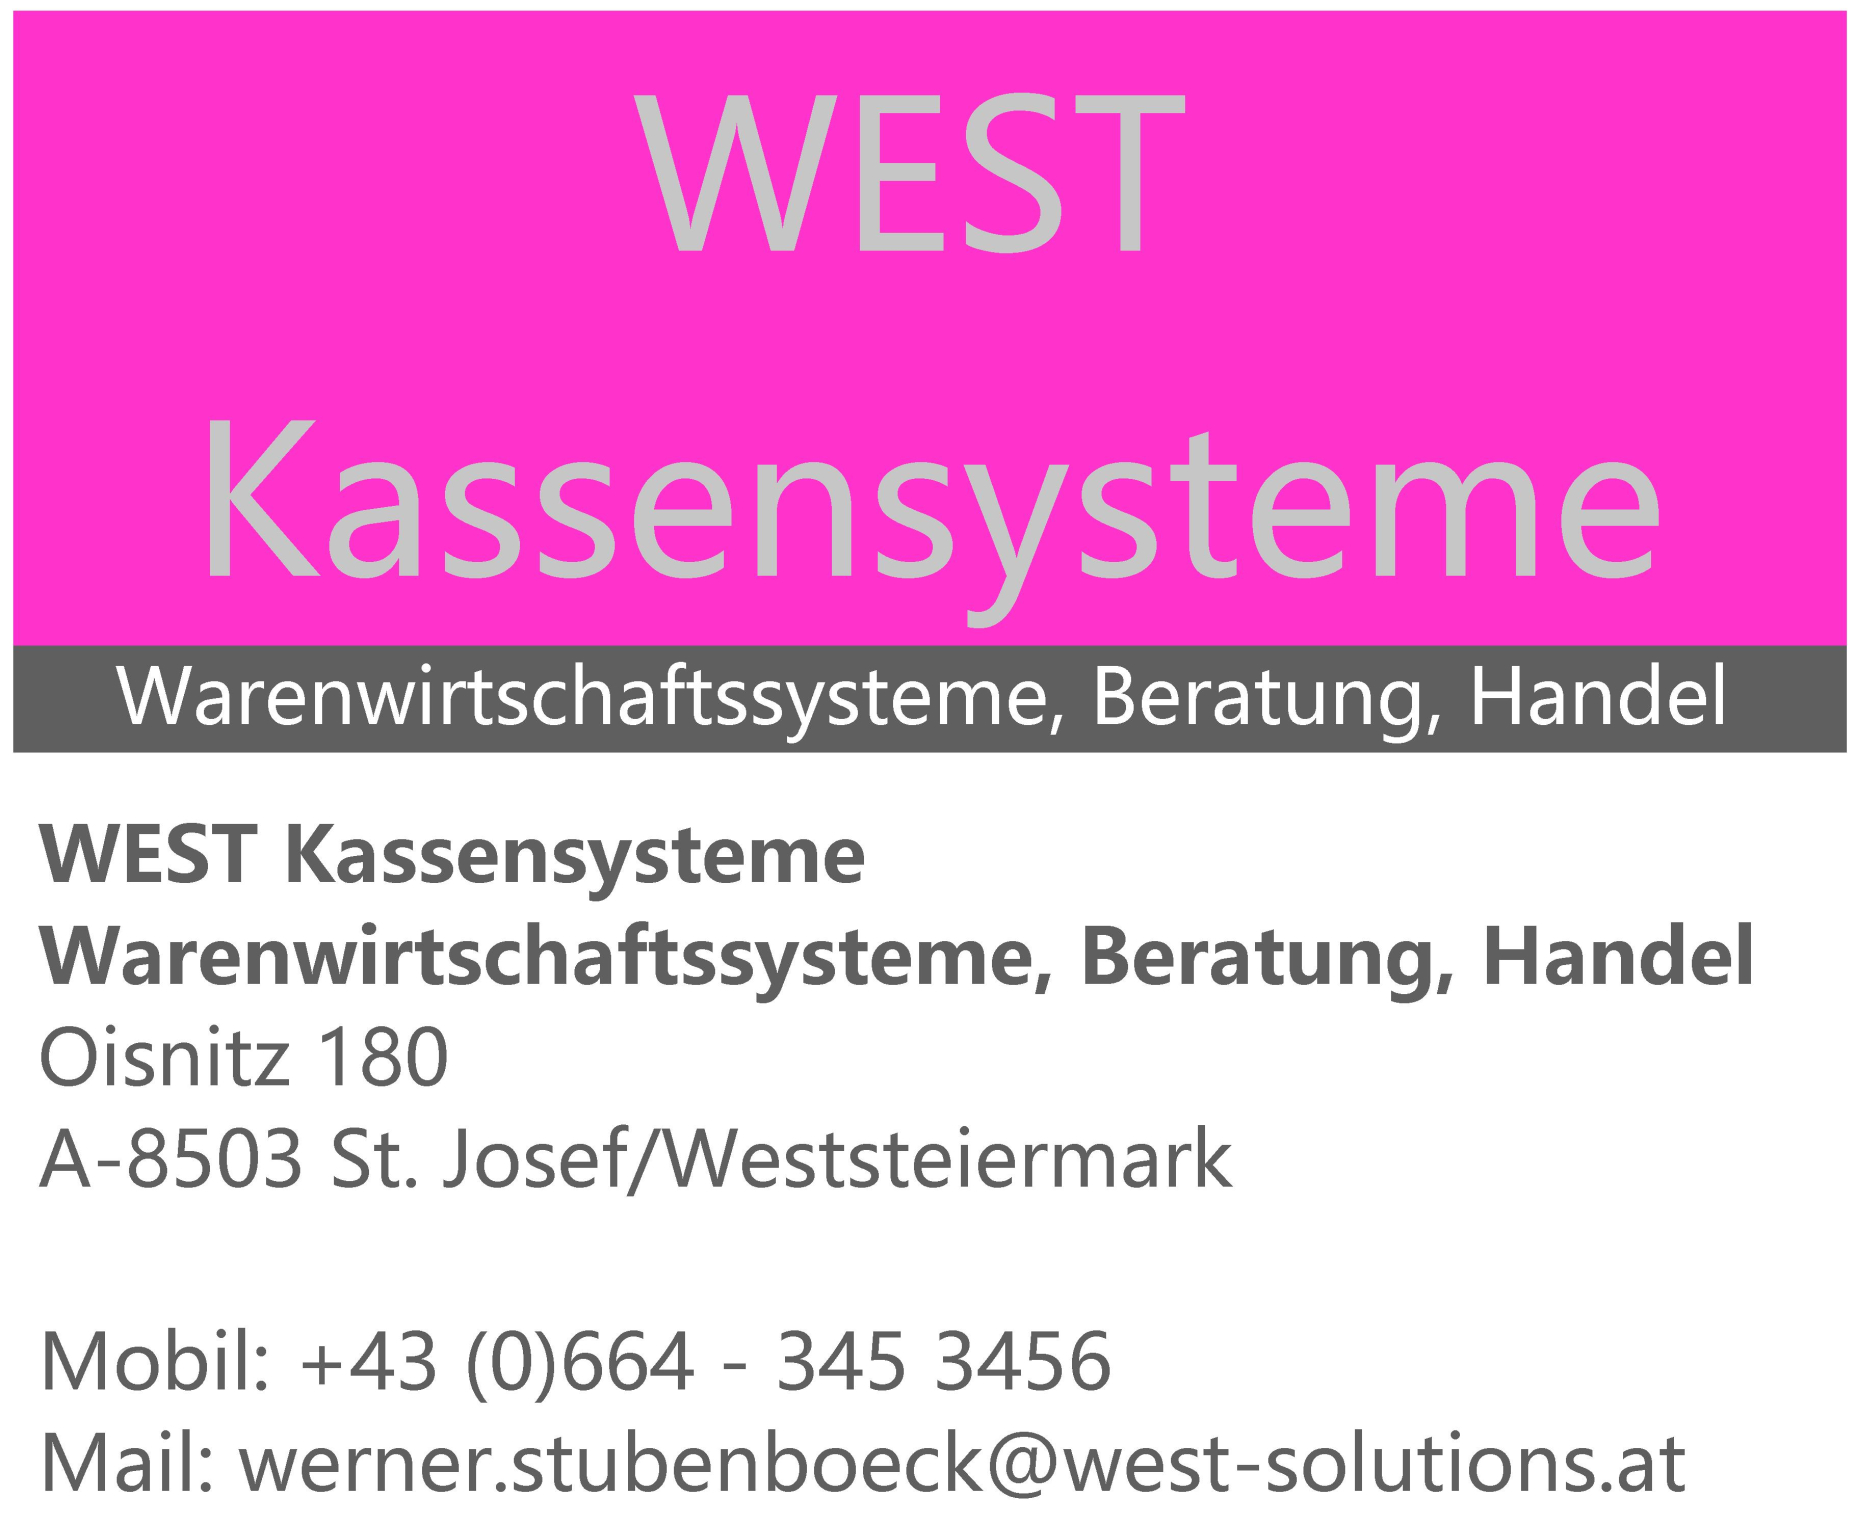 (c) West-solutions.at